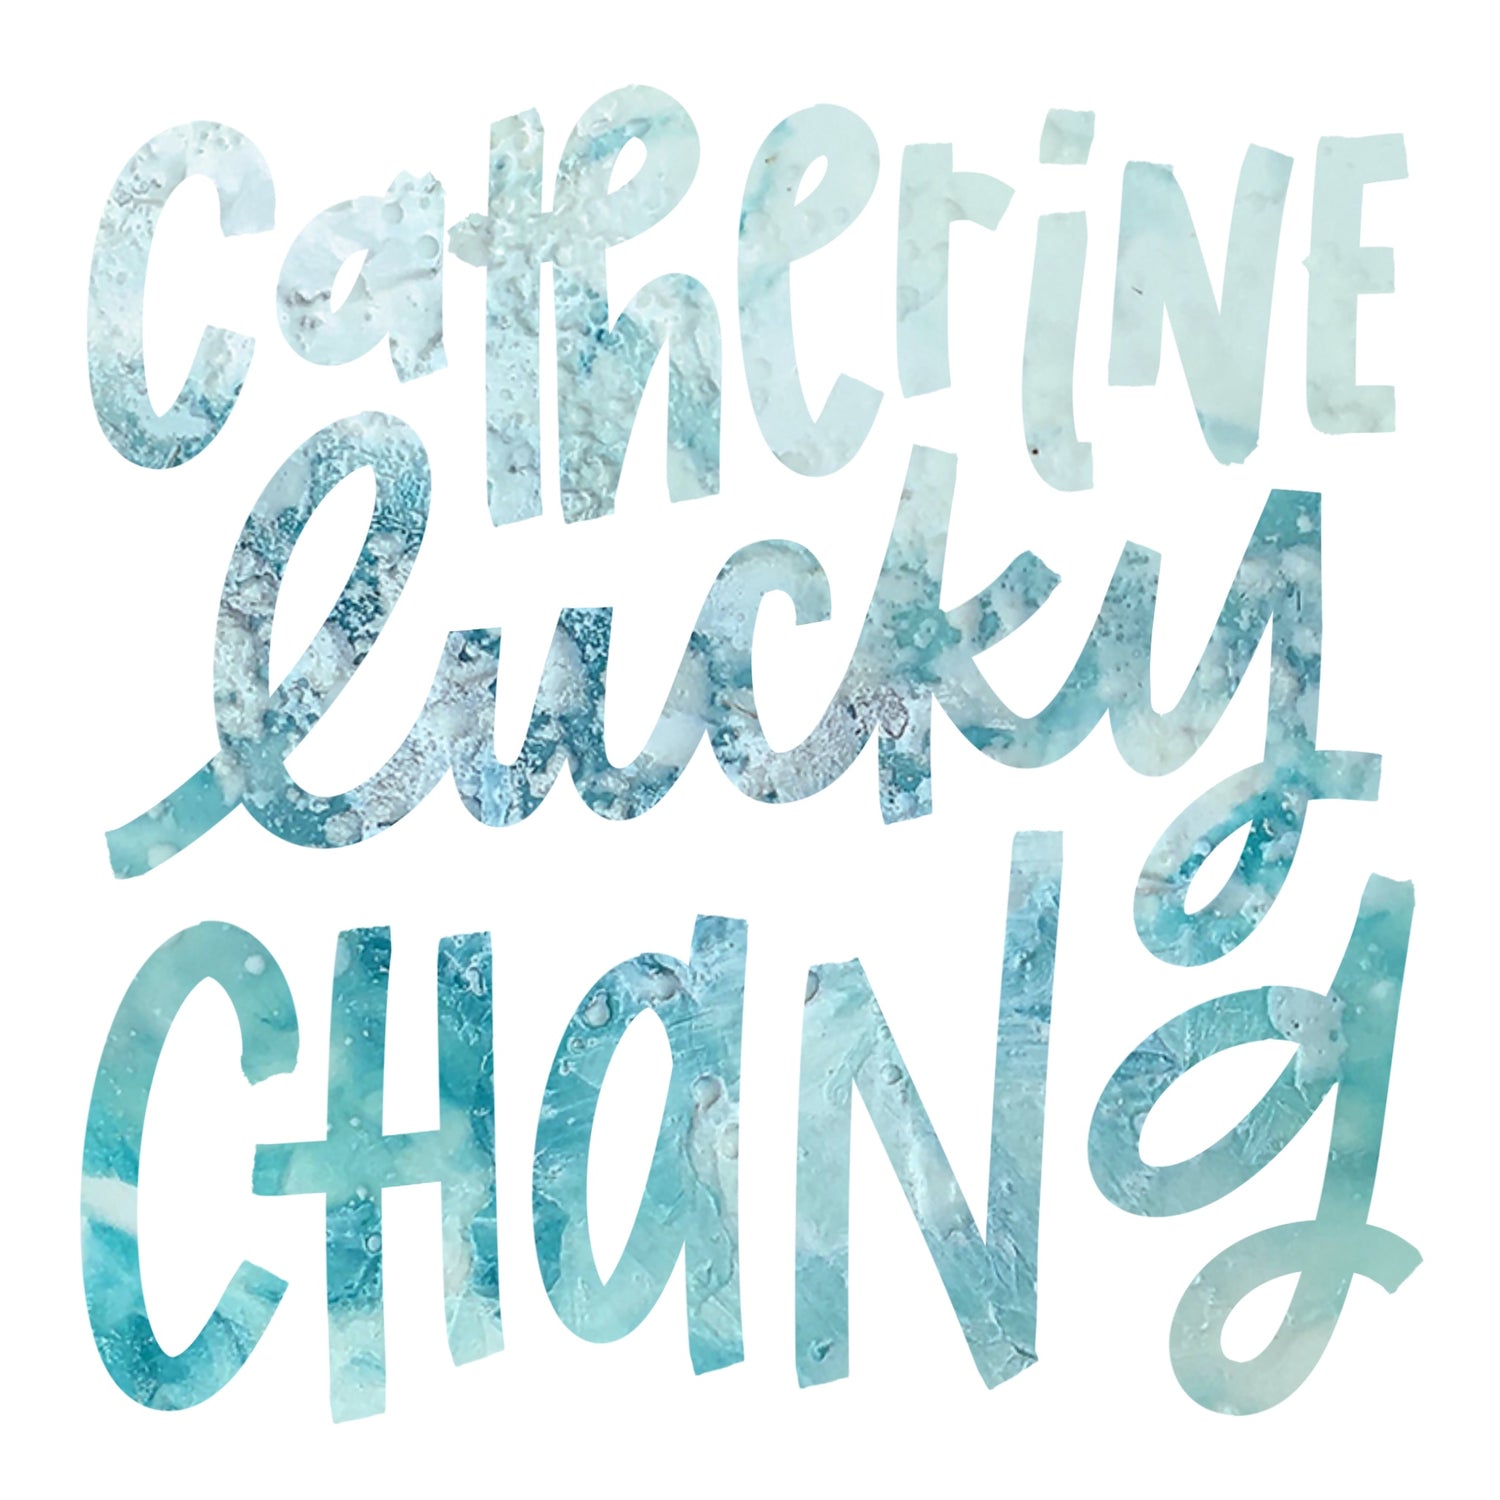 Catherine Lucky Chang